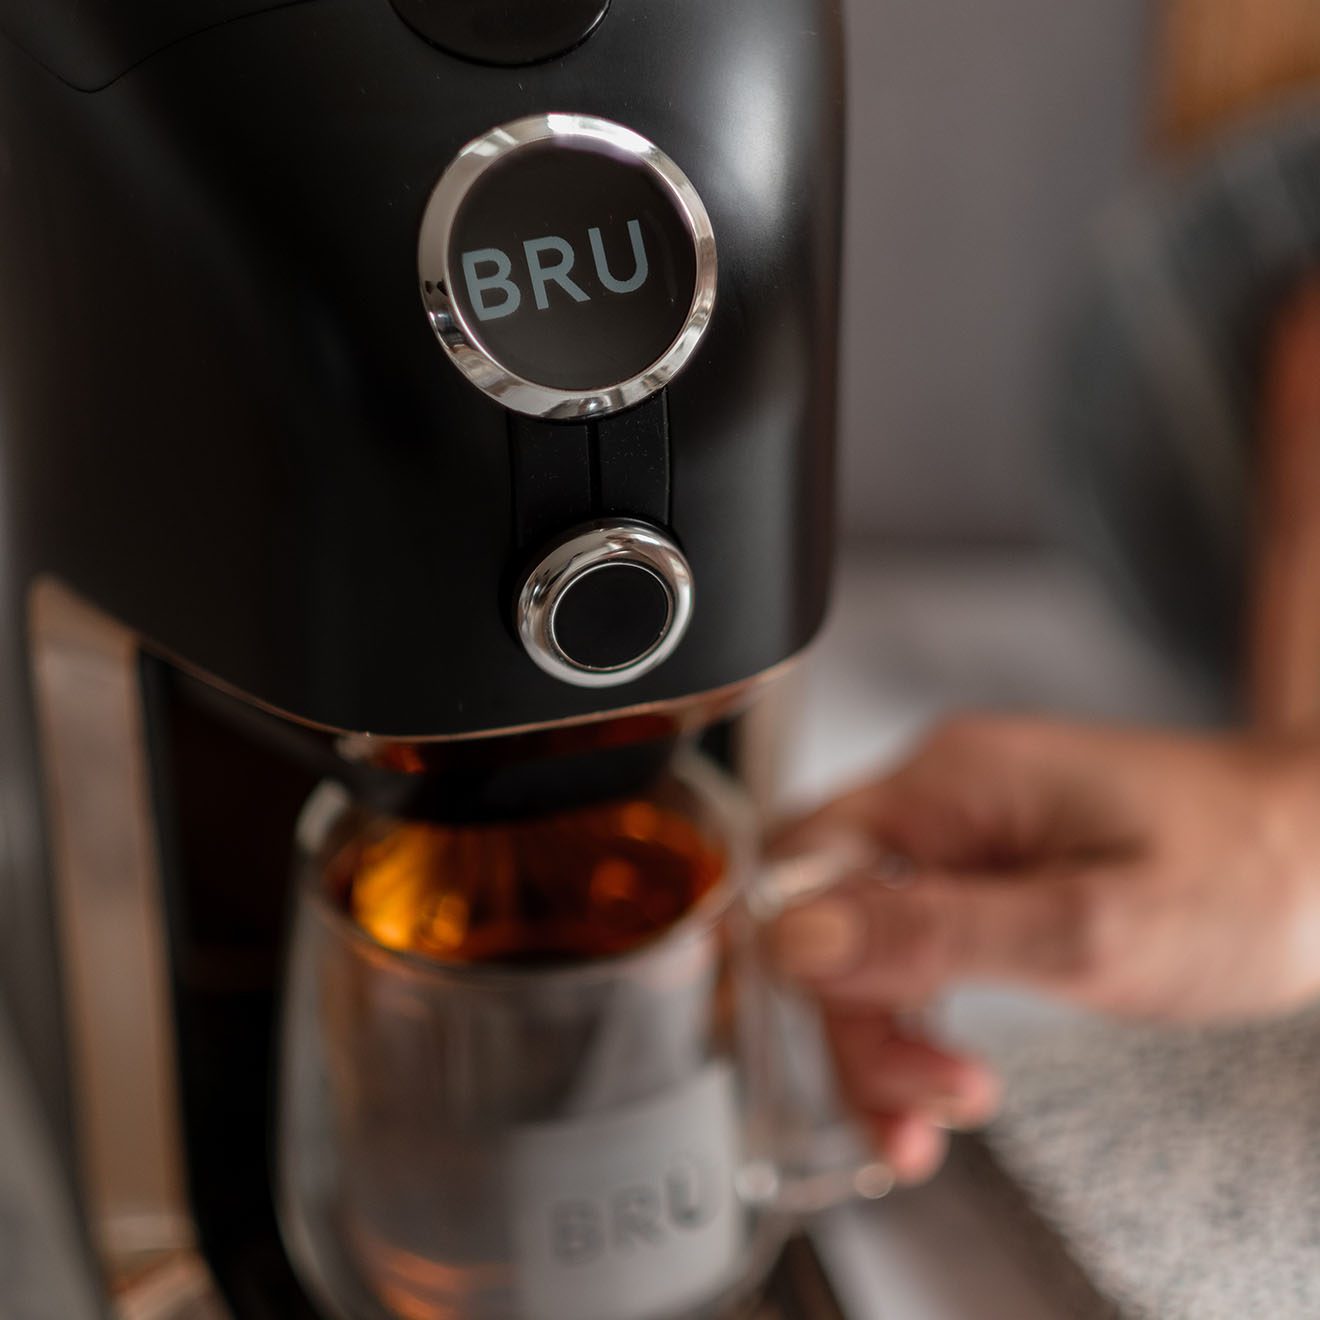 Woman taking a brewed cup of tea from the BRU machine.